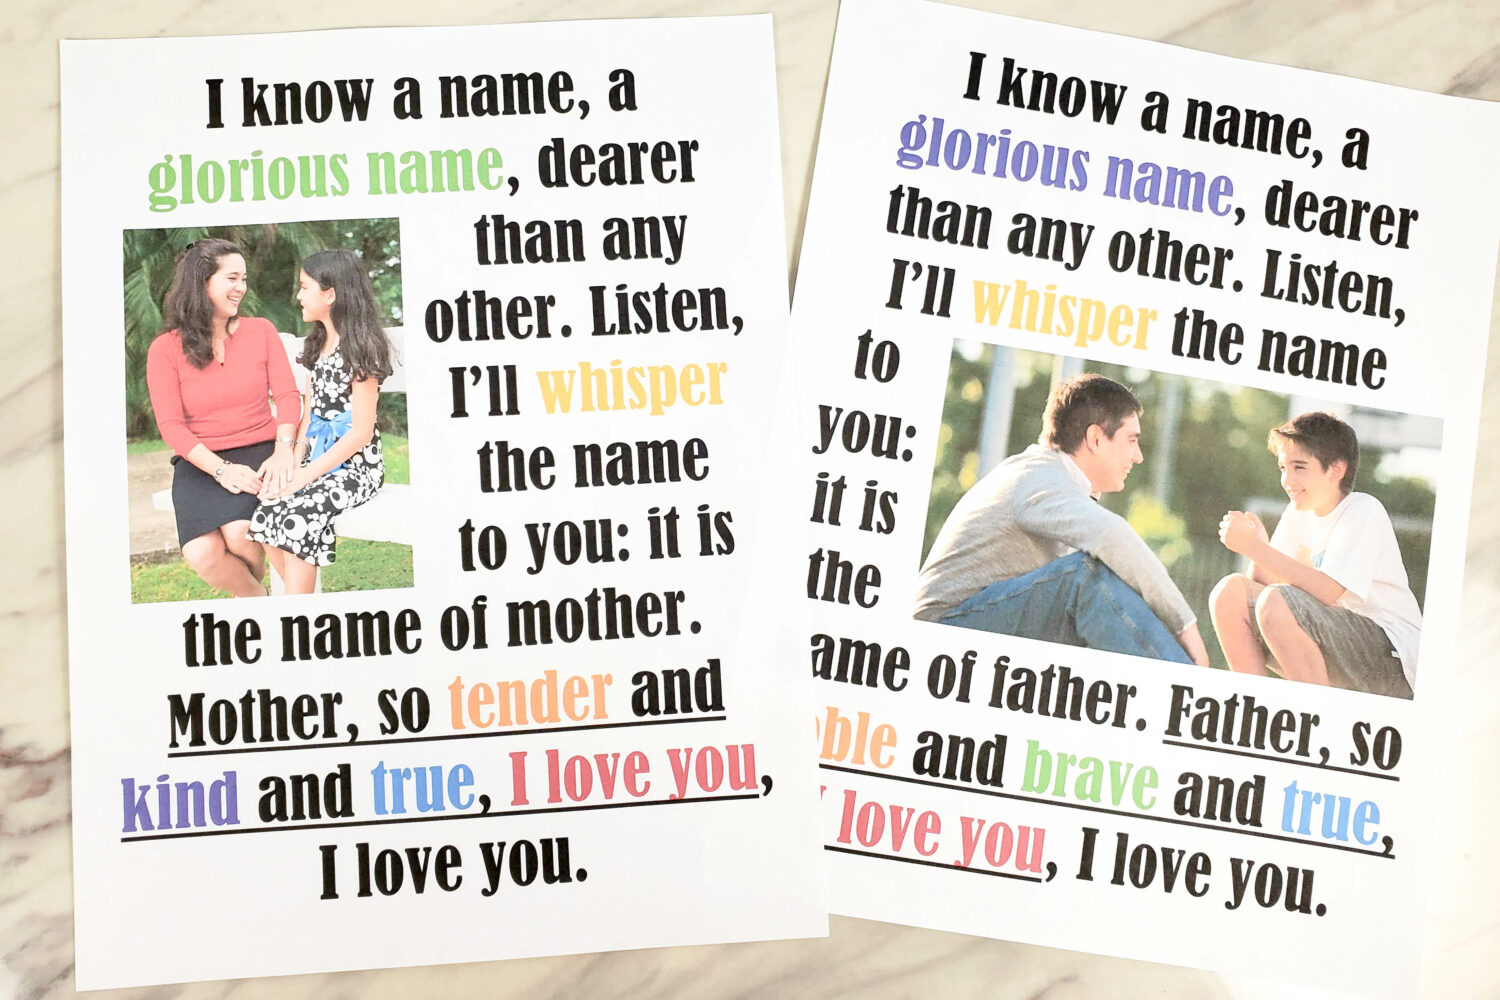 The Dearest Names flip chart and lyrics singing time helps for LDS Primary Music Leaders teaching this Mother's Day or Father's Day Song